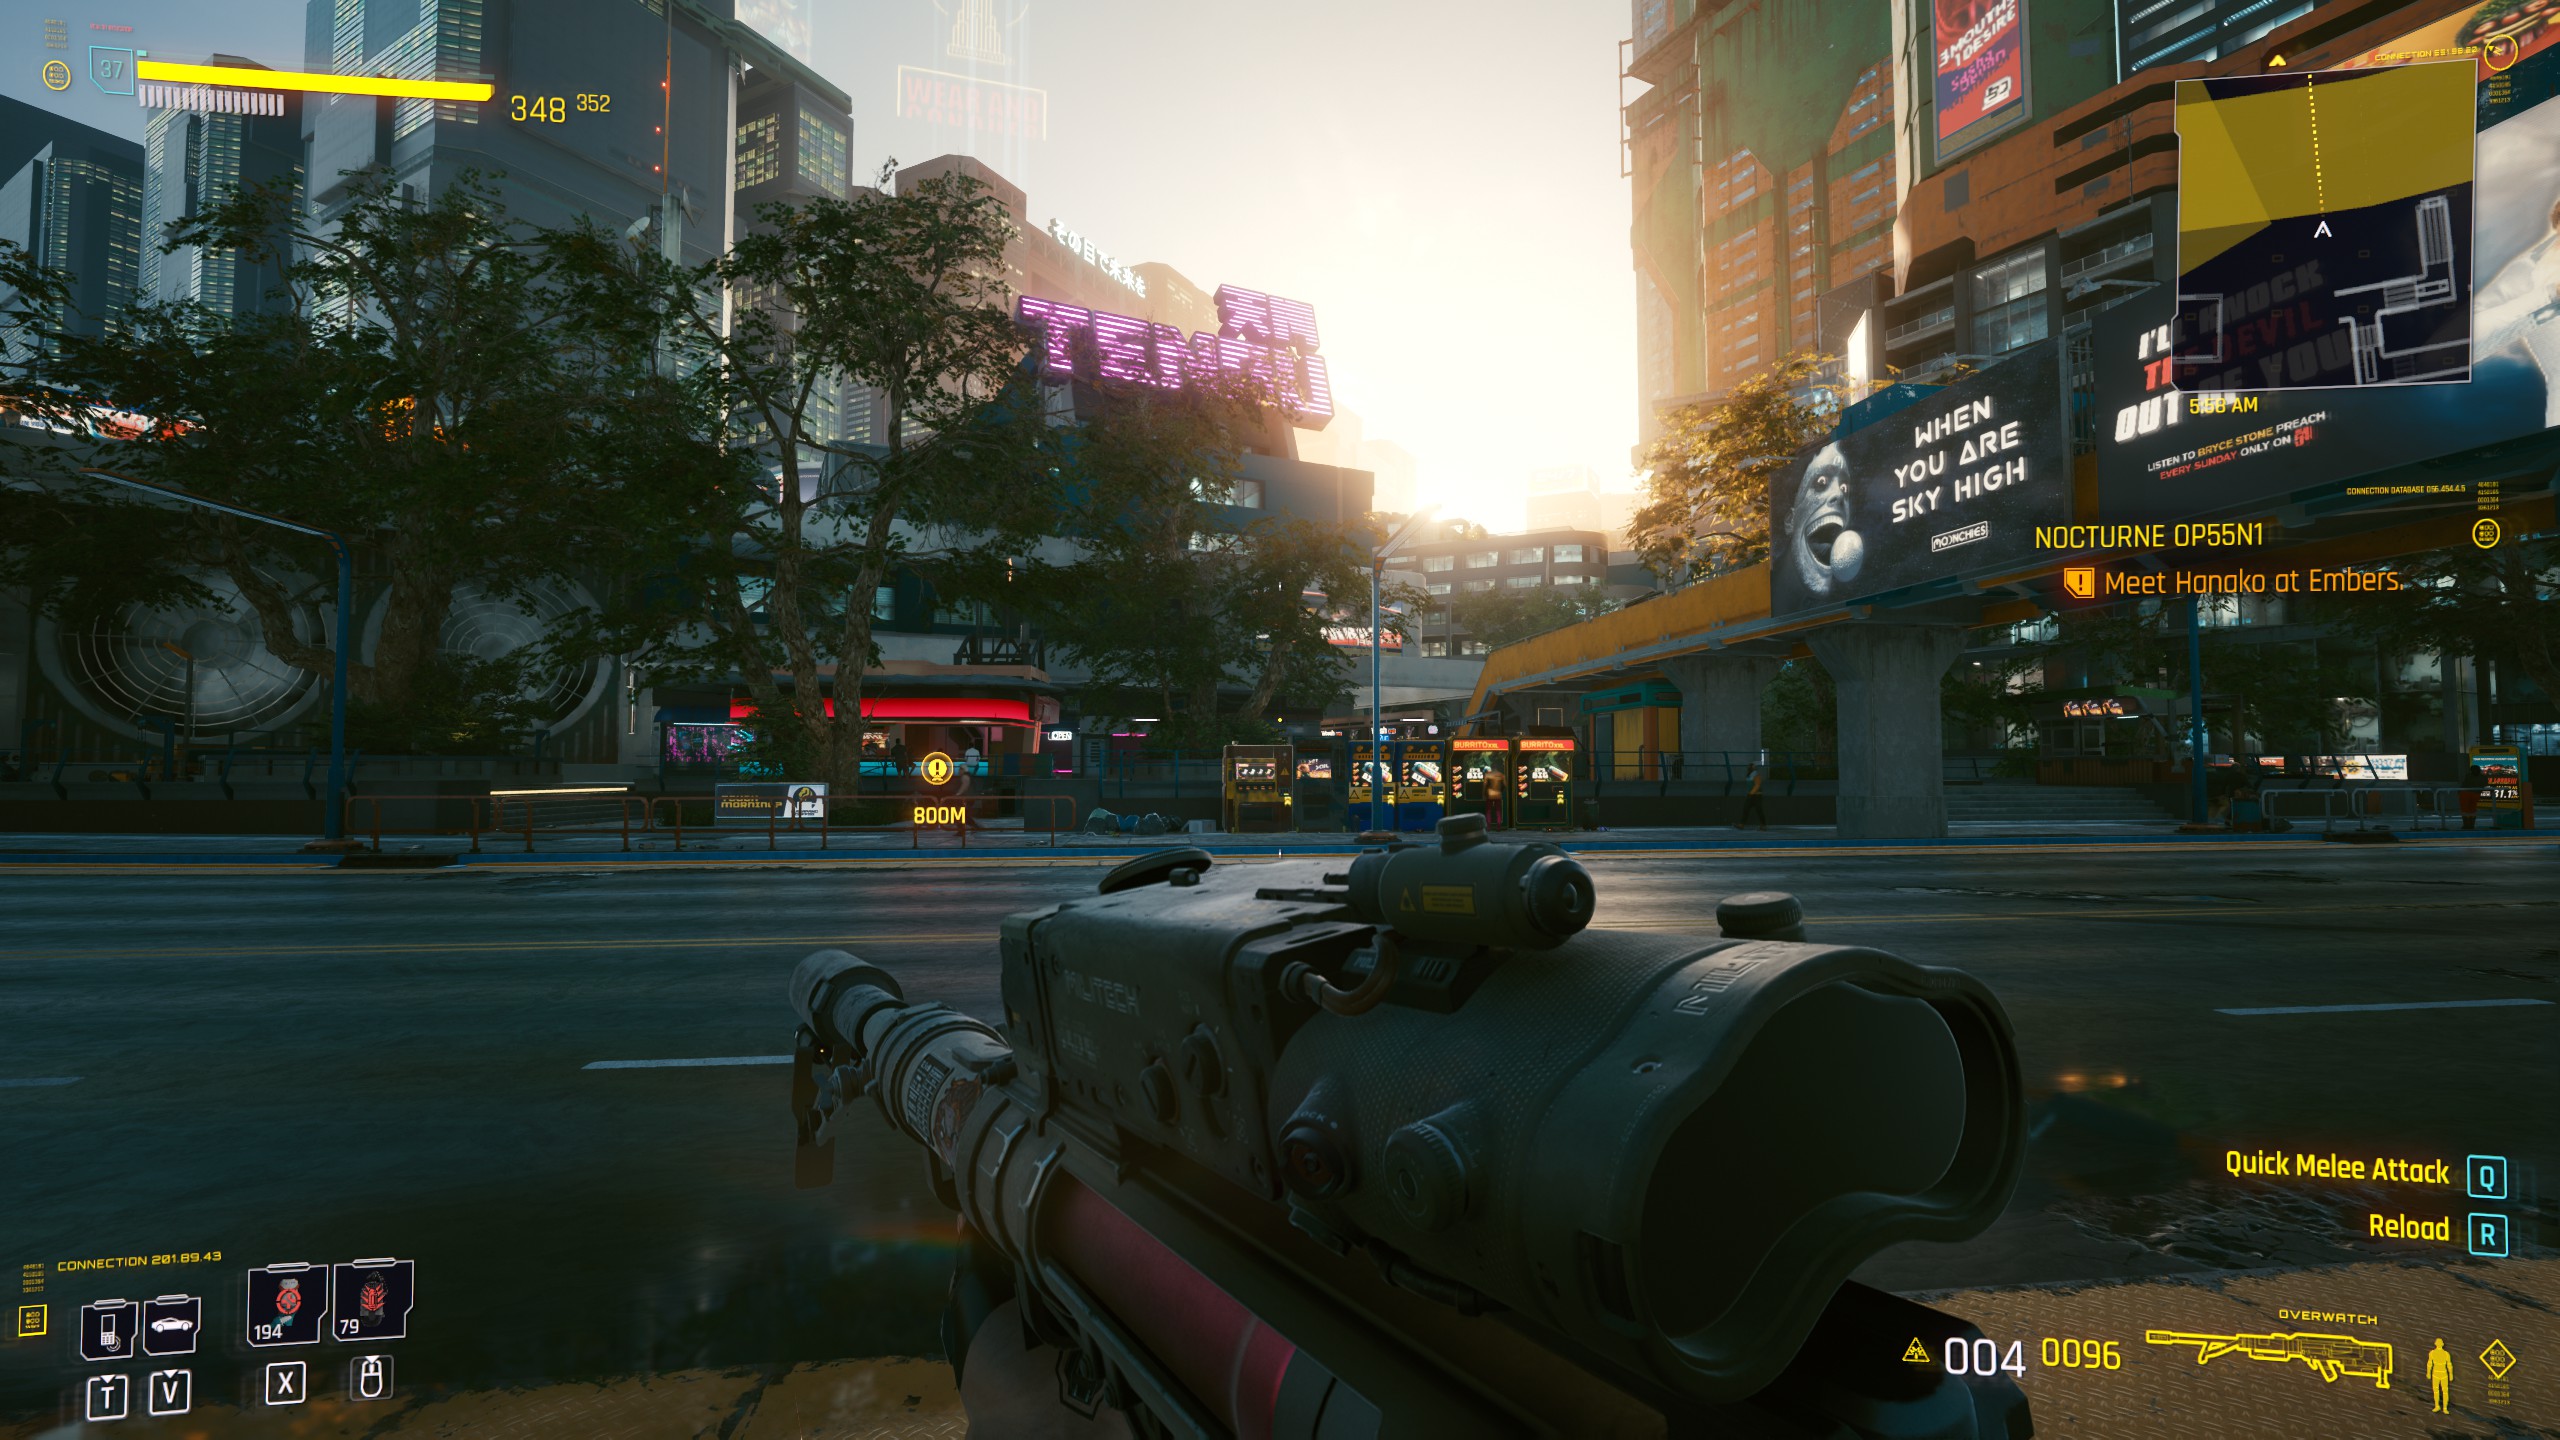 Cyberpunk 2077 Game Optimizations for RTX Settings - FPS Boost - Mouse Lag Fix - Video Quality in Cyberpunk 2077 in 2021